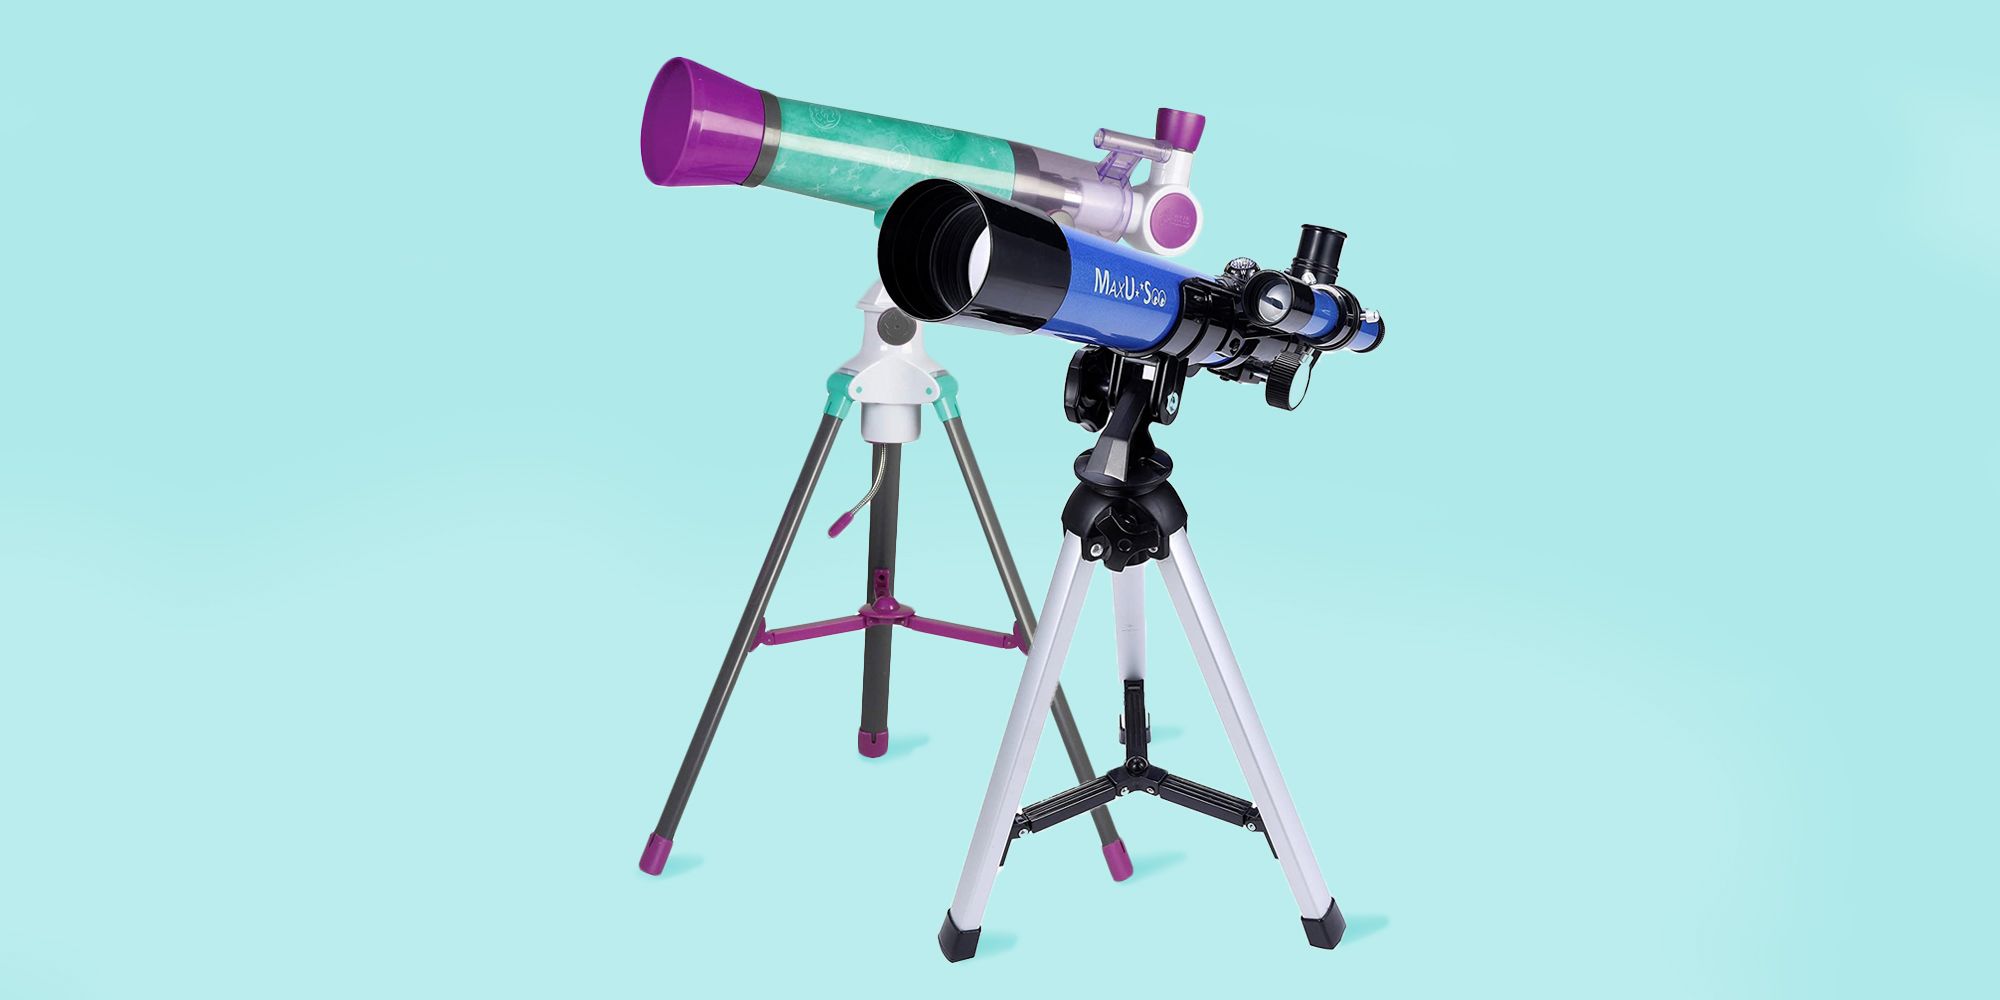 15-150X Astronomical Refractor Telescope with Adjustable Tripod 70mm Aperture 300mm Kids Telescope for Astronomy Beginners Phone Adapter BNISE Telescope for Kids 10 and Up Wire Shutter and Bag 